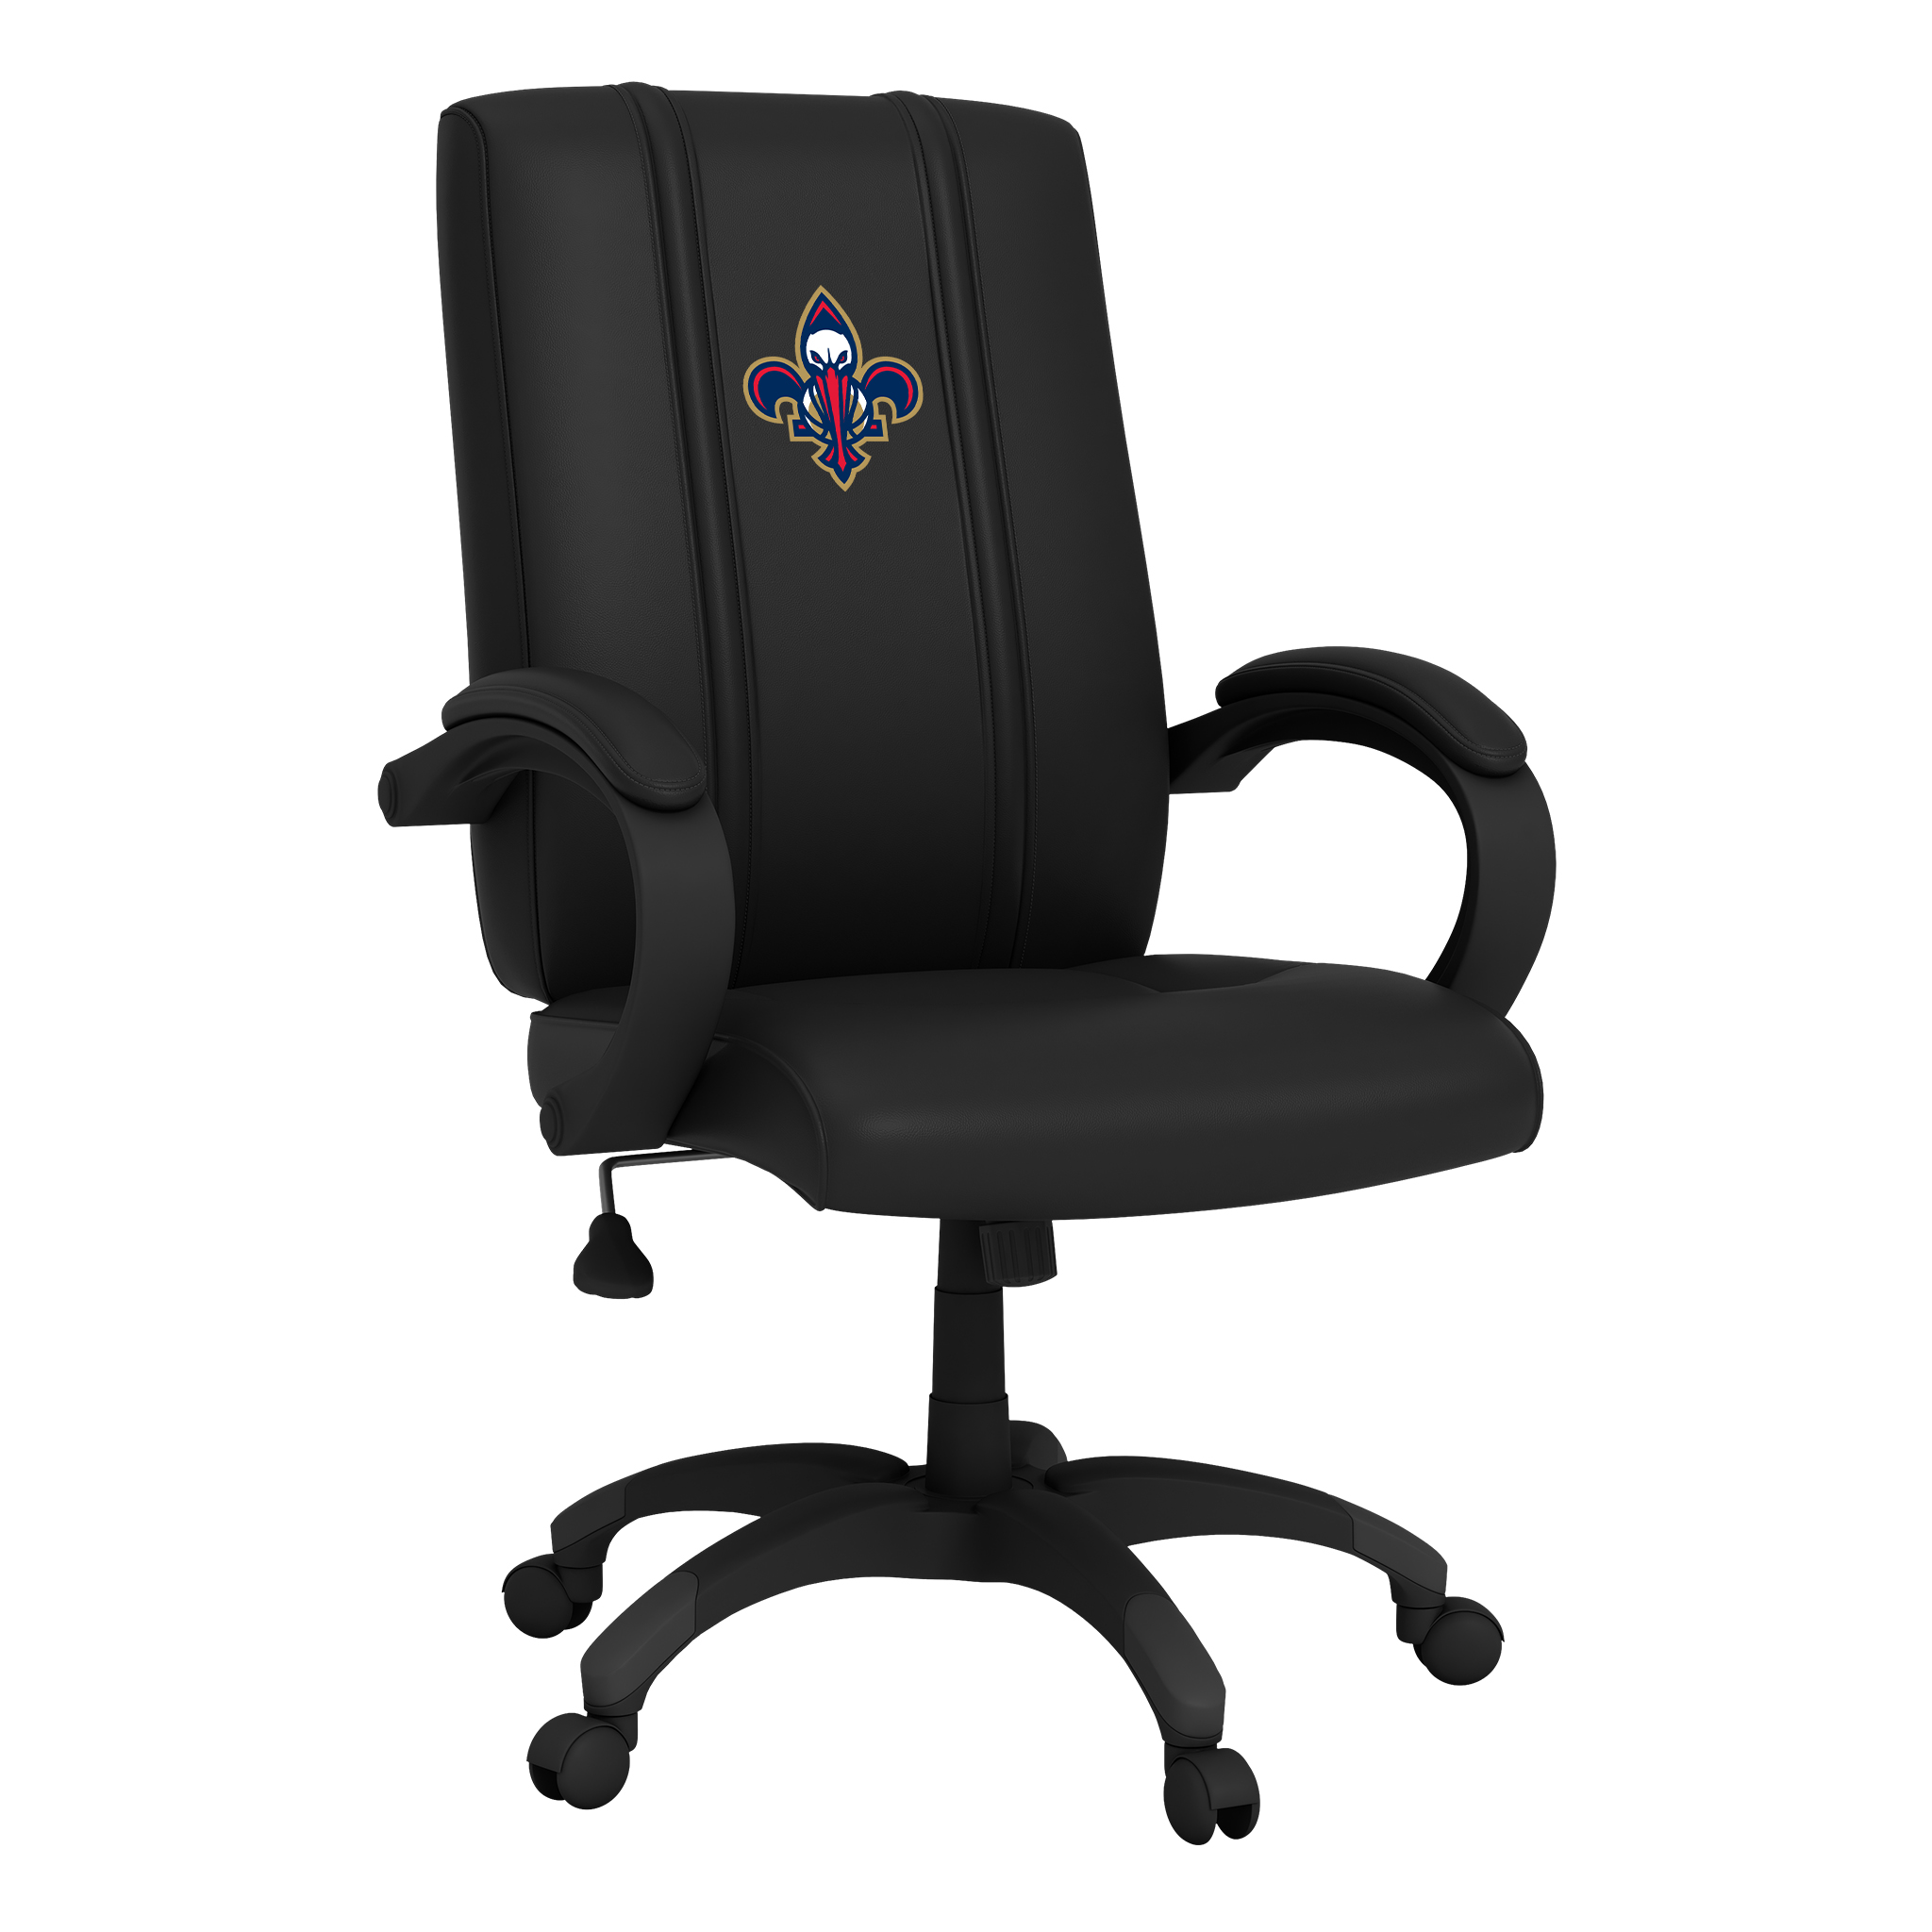 New Orleans Pelicans Office Chair 1000 with New Orleans Pelicans Secondary